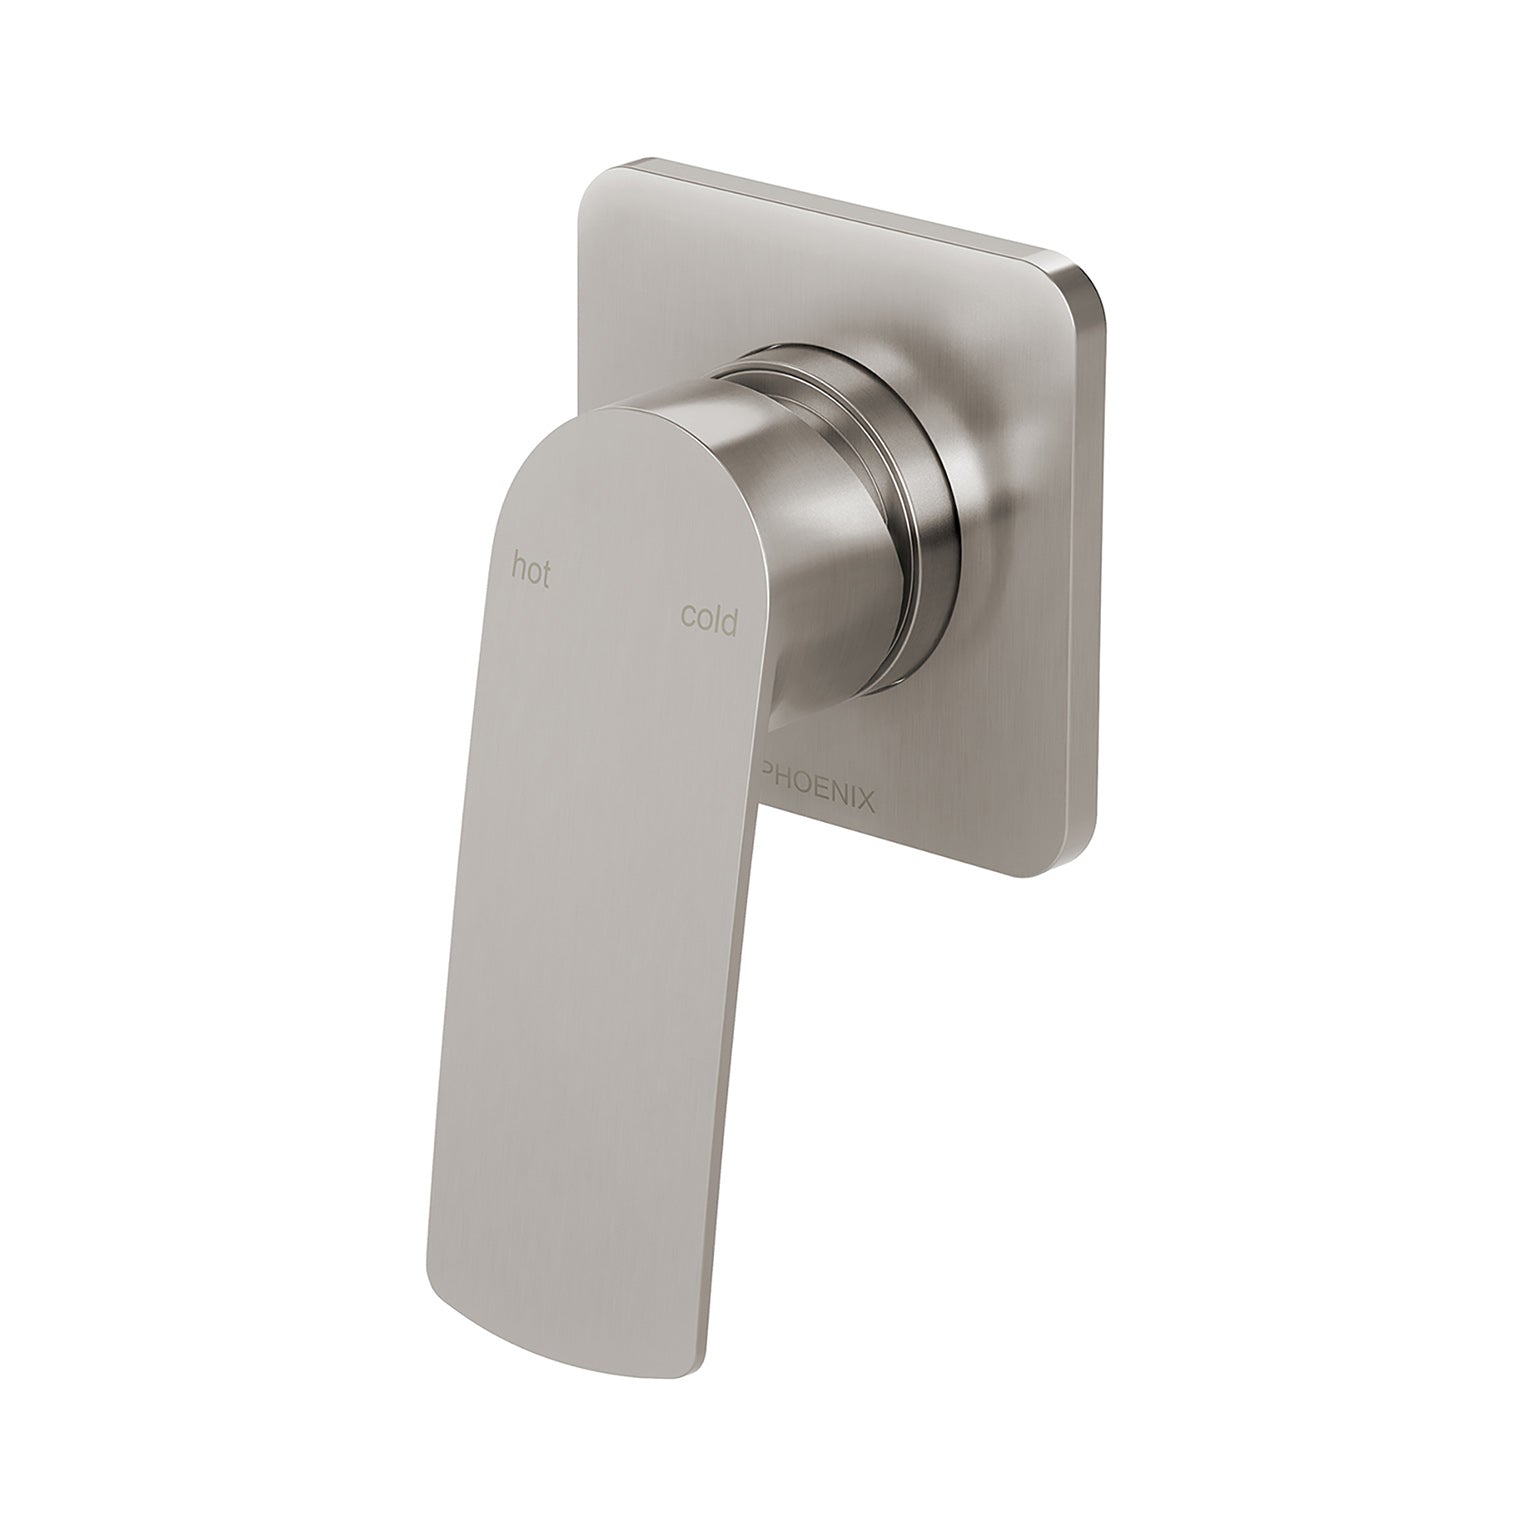 PHOENIX MEKKO SWITCHMIX WALL MIXER W/ SQUARE BACKPLATE FIT-OFF AND ROUGH-IN KIT BRUSHED NICKEL